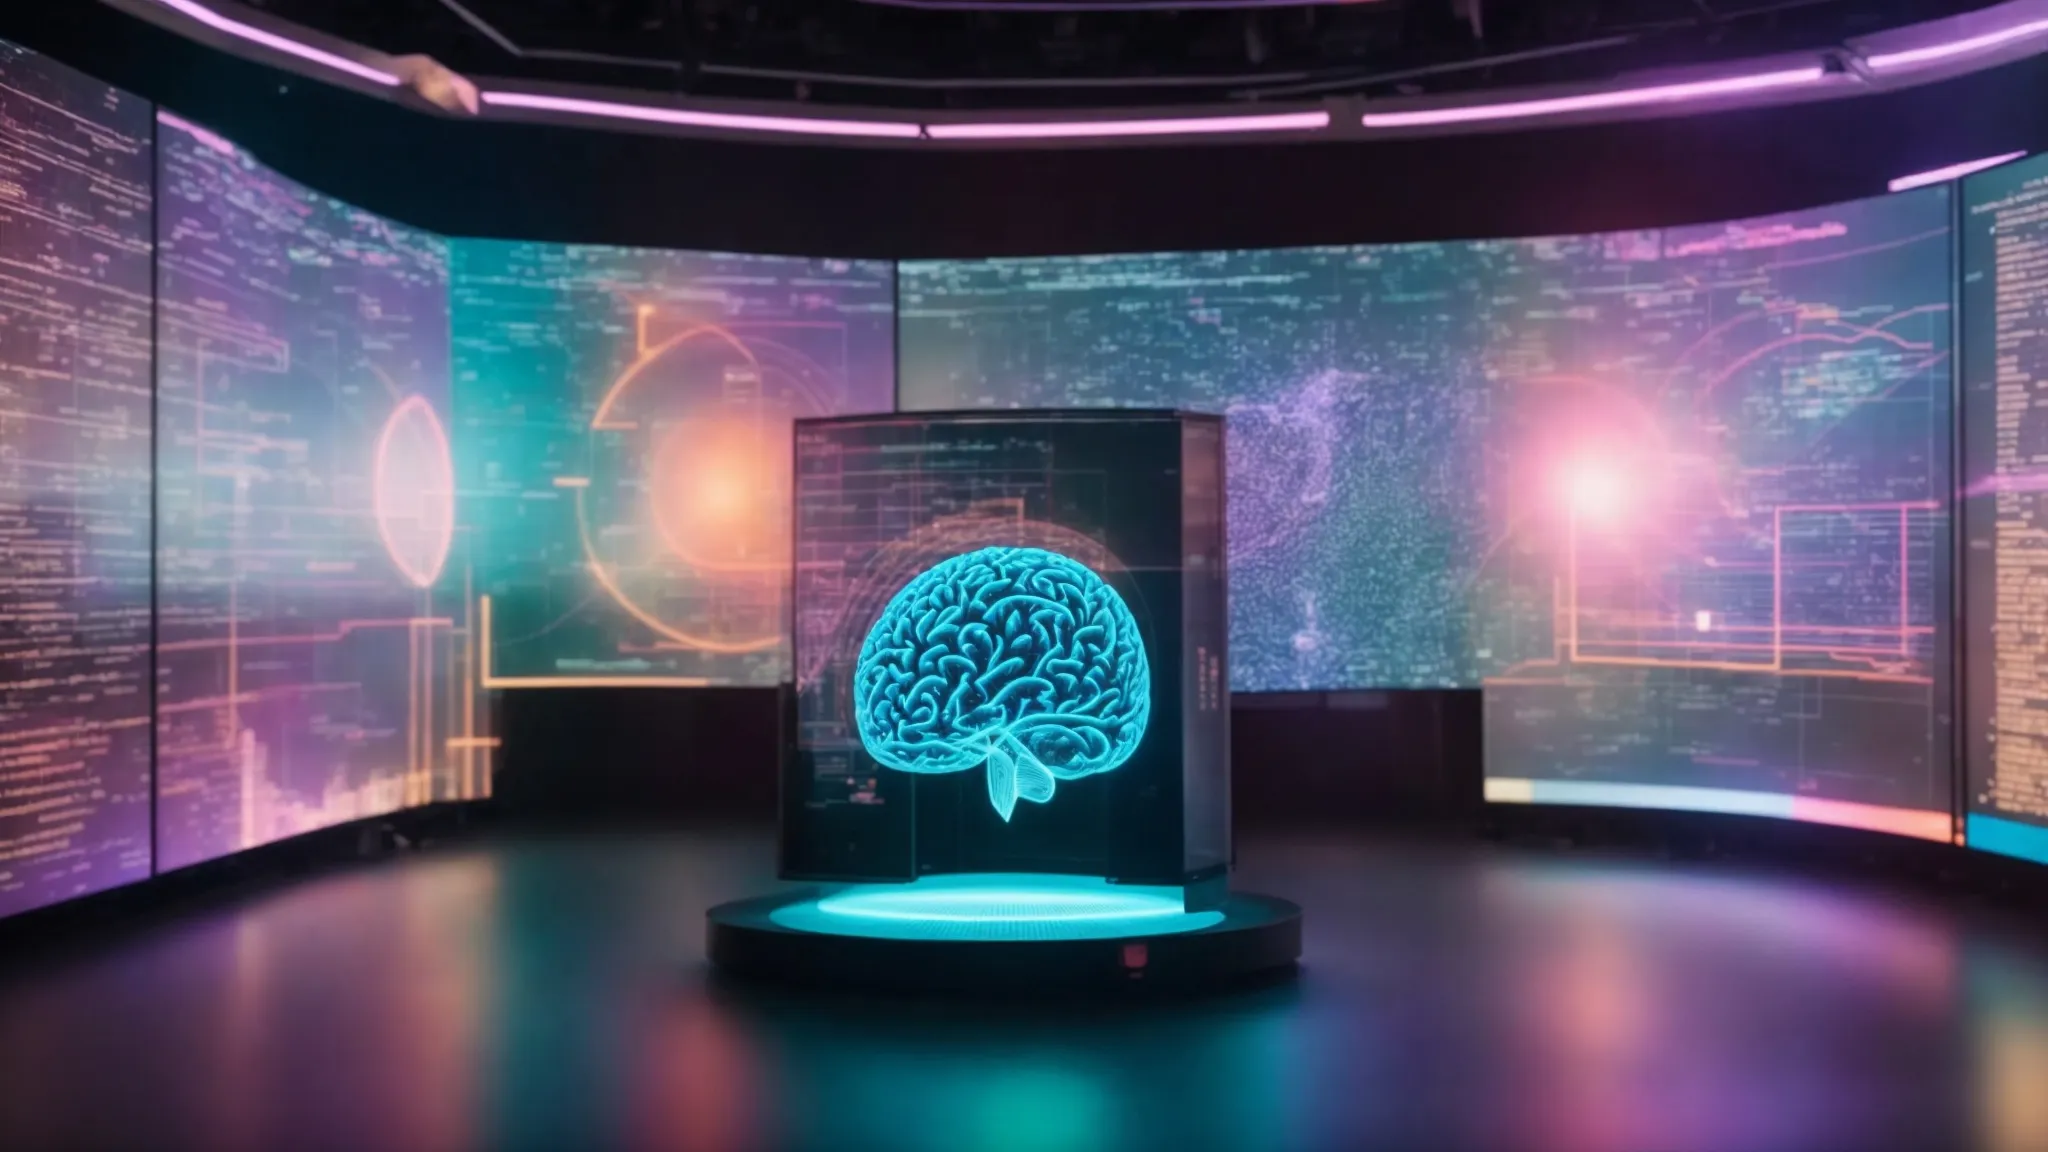 a broad, sunlit room filled with large screens displaying colorful graphs and ai interfaces, where a futuristic hologram of a brain pulses in the center, symbolizing the blend of creativity and technology.